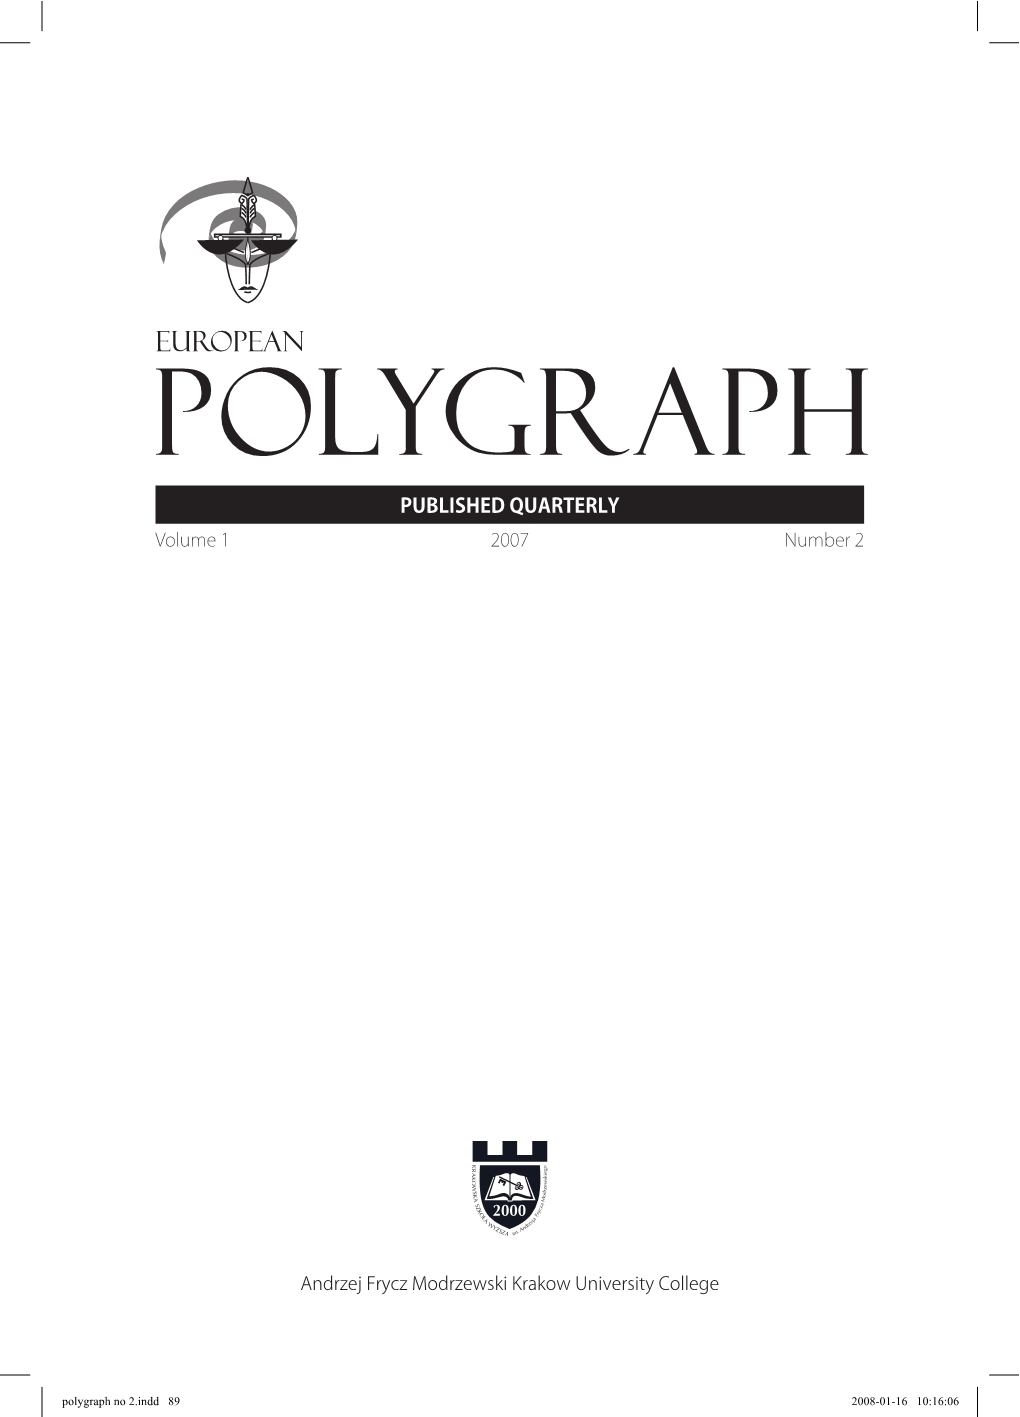 An attempt to falsify the results of a polygraph test through the implementation of false memory: a case study